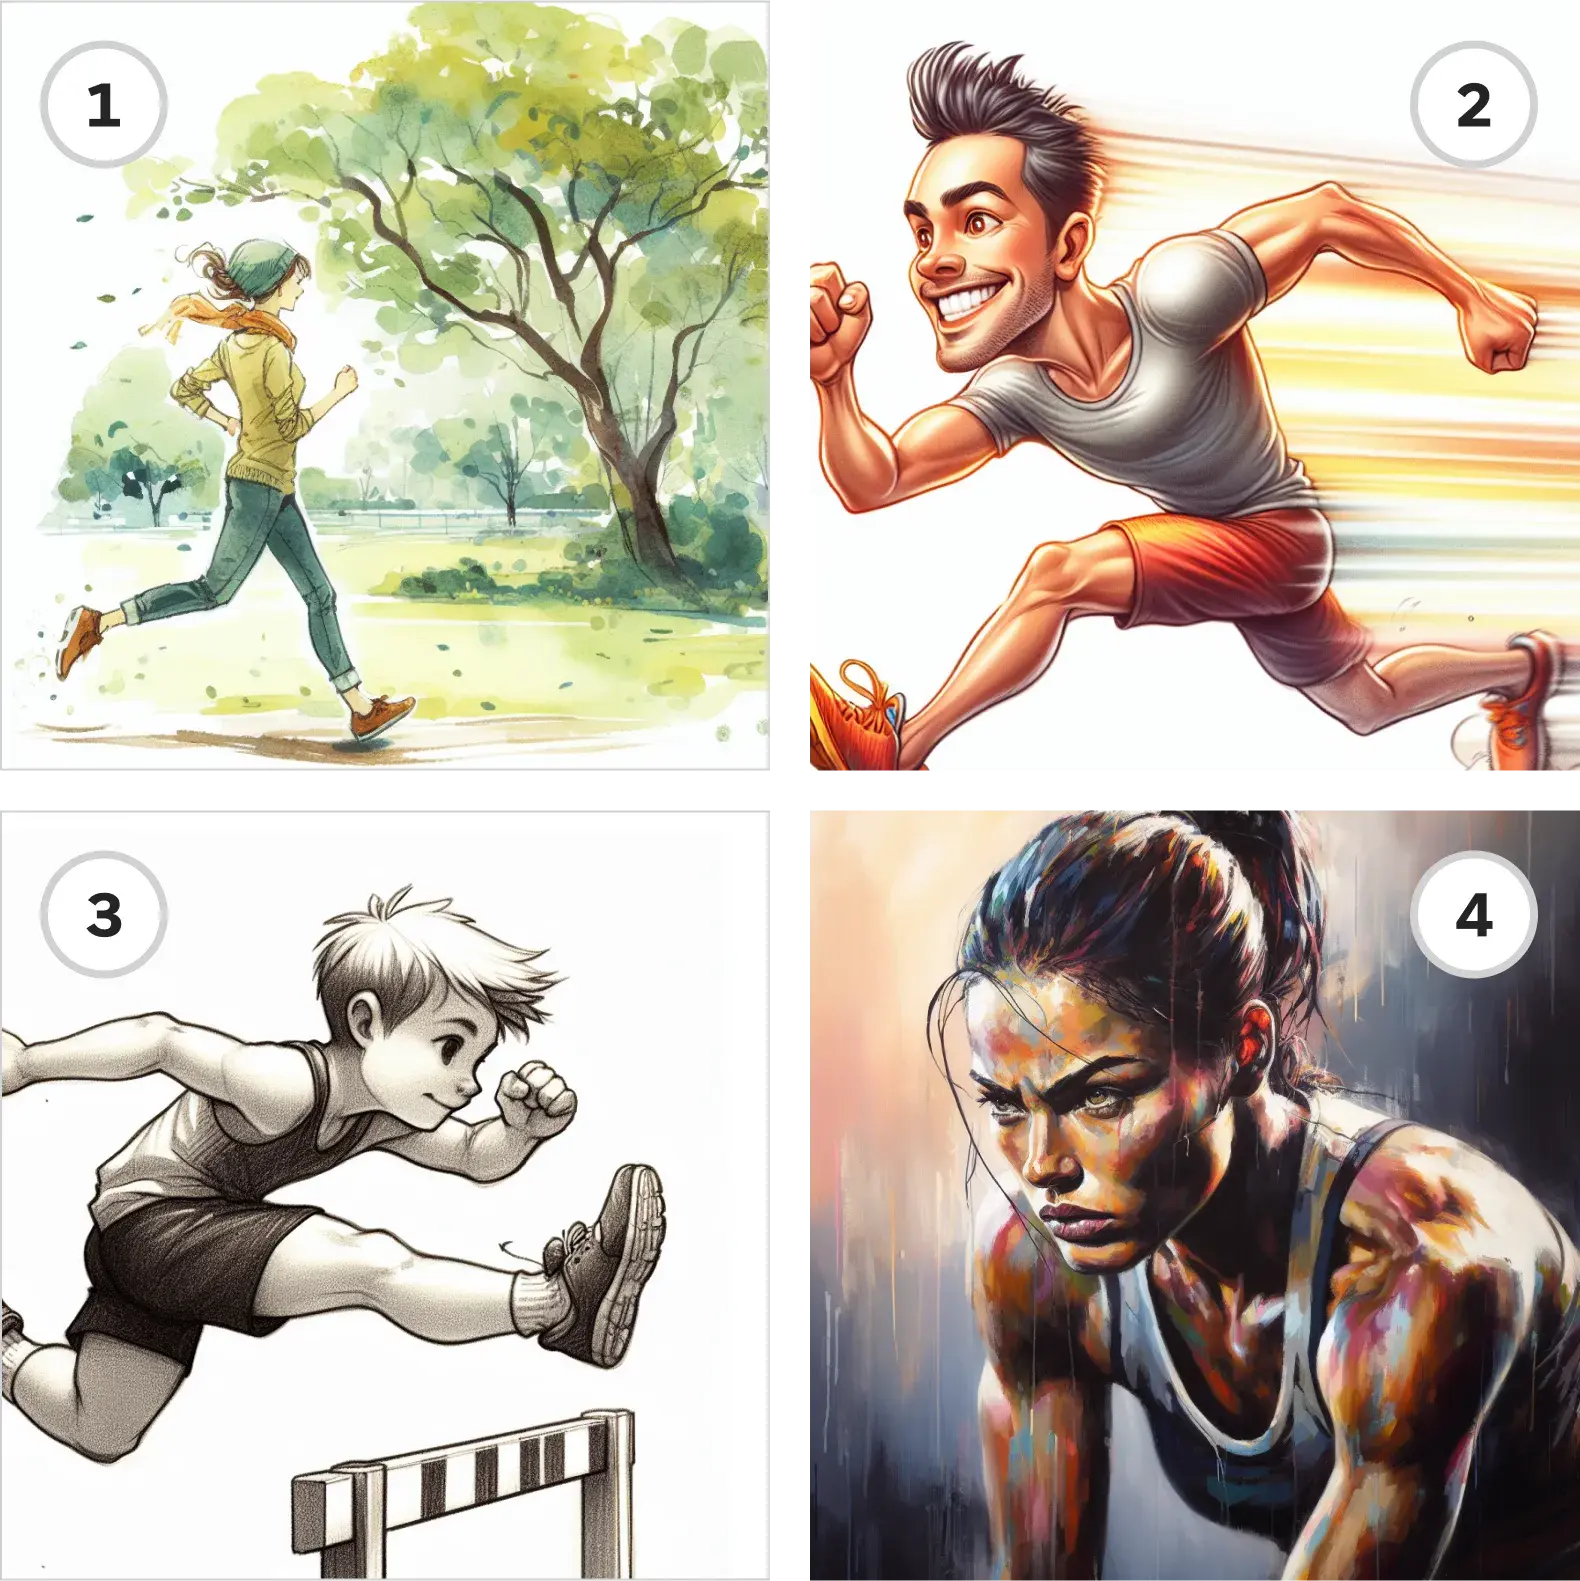 Four different images of athletes displayed in different art mediums: watercolor, airbrush, pencil, and acrylic. 